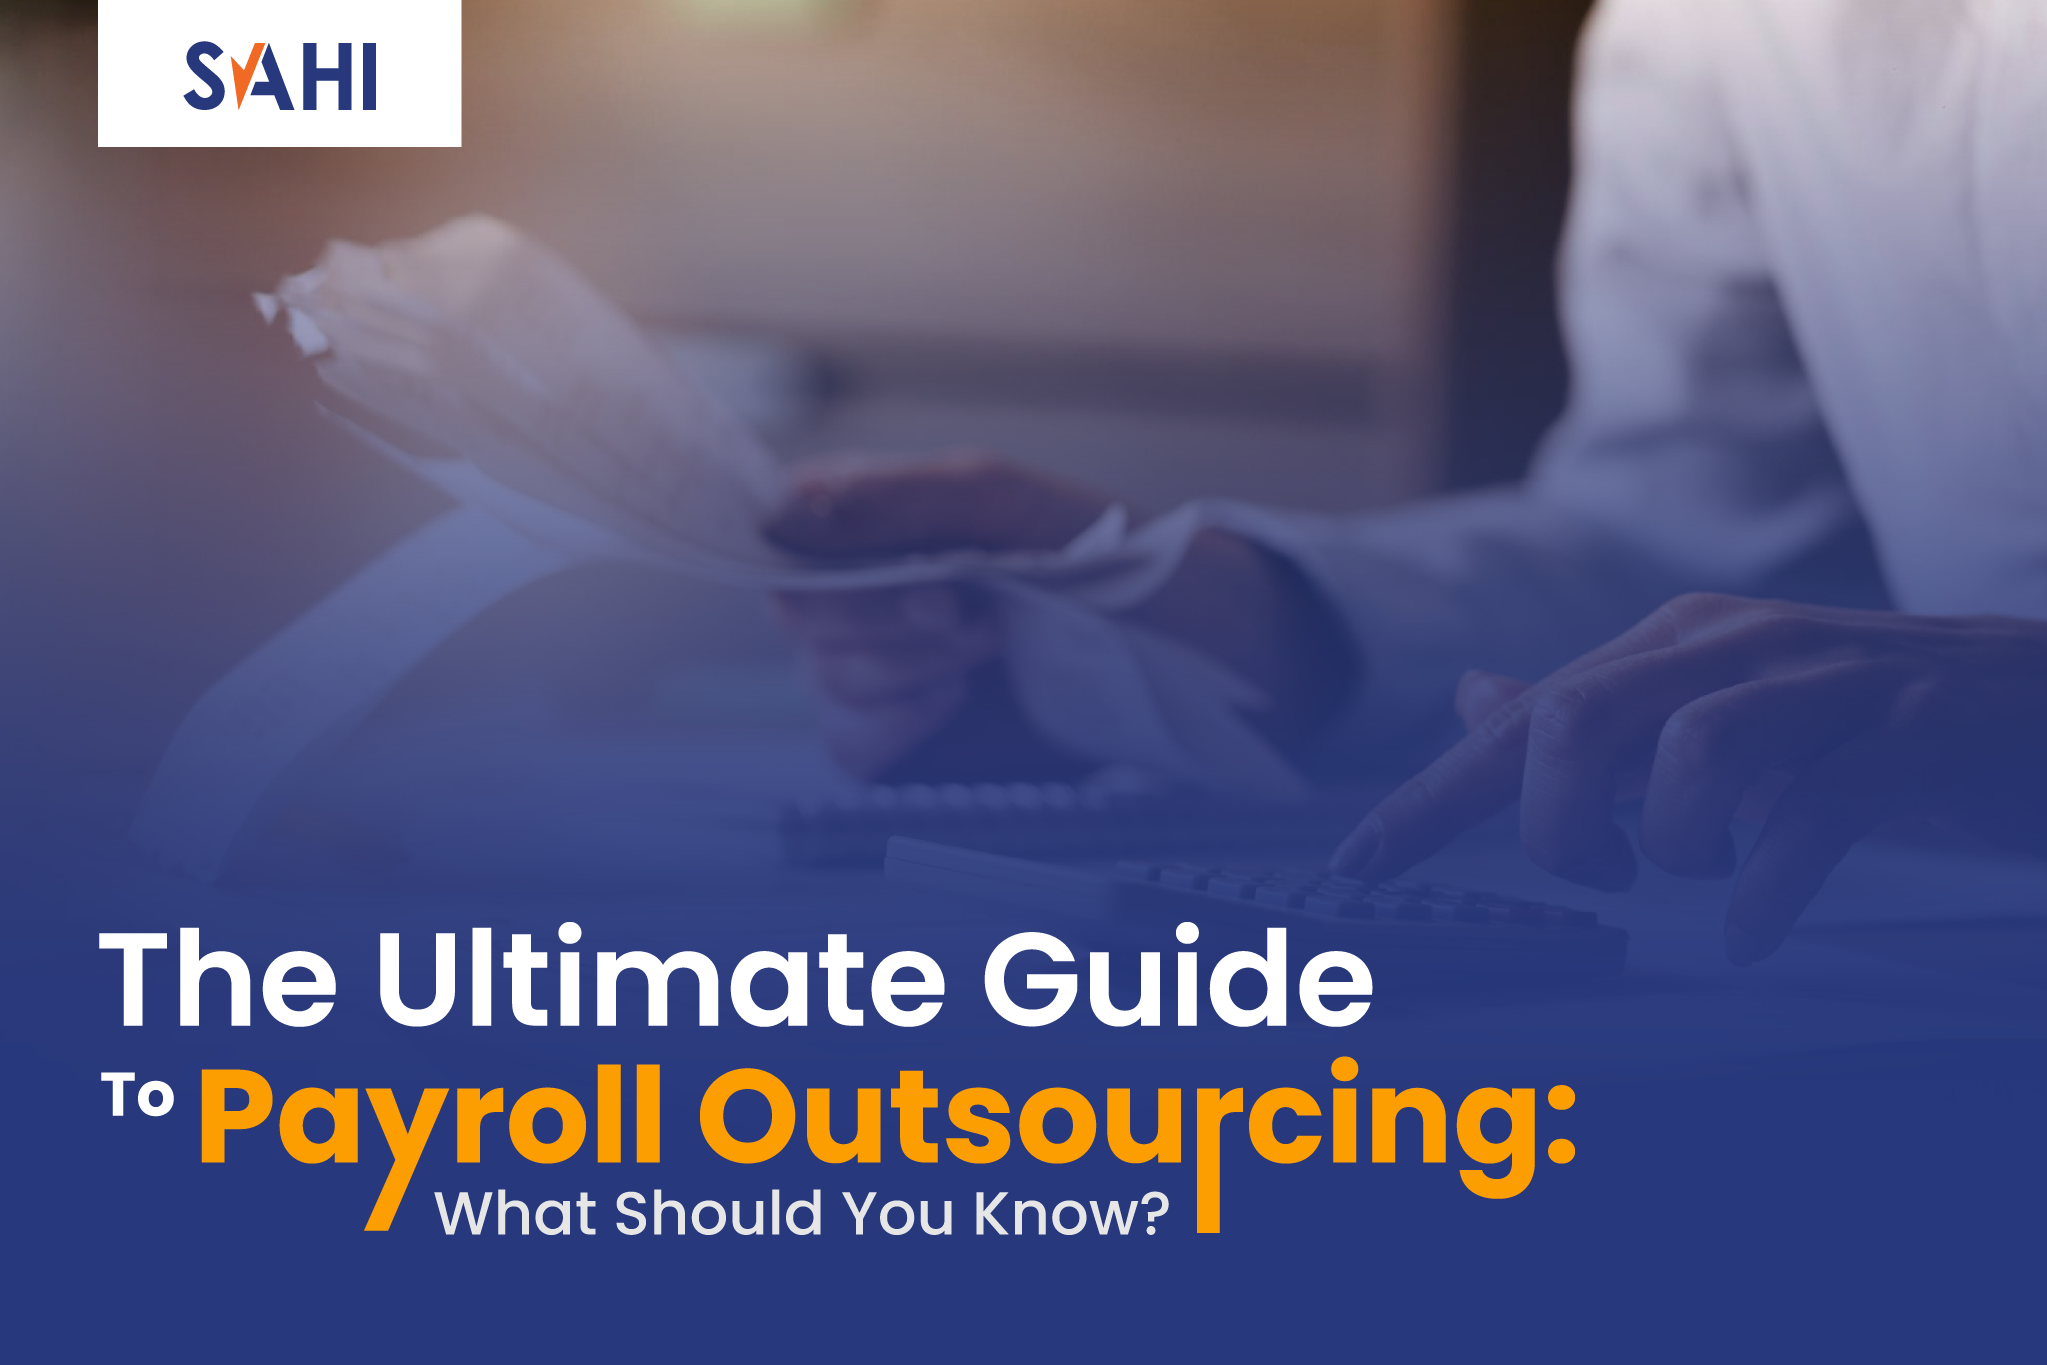 The Ultimate Guide To Payroll Outsourcing: What Should You Know?